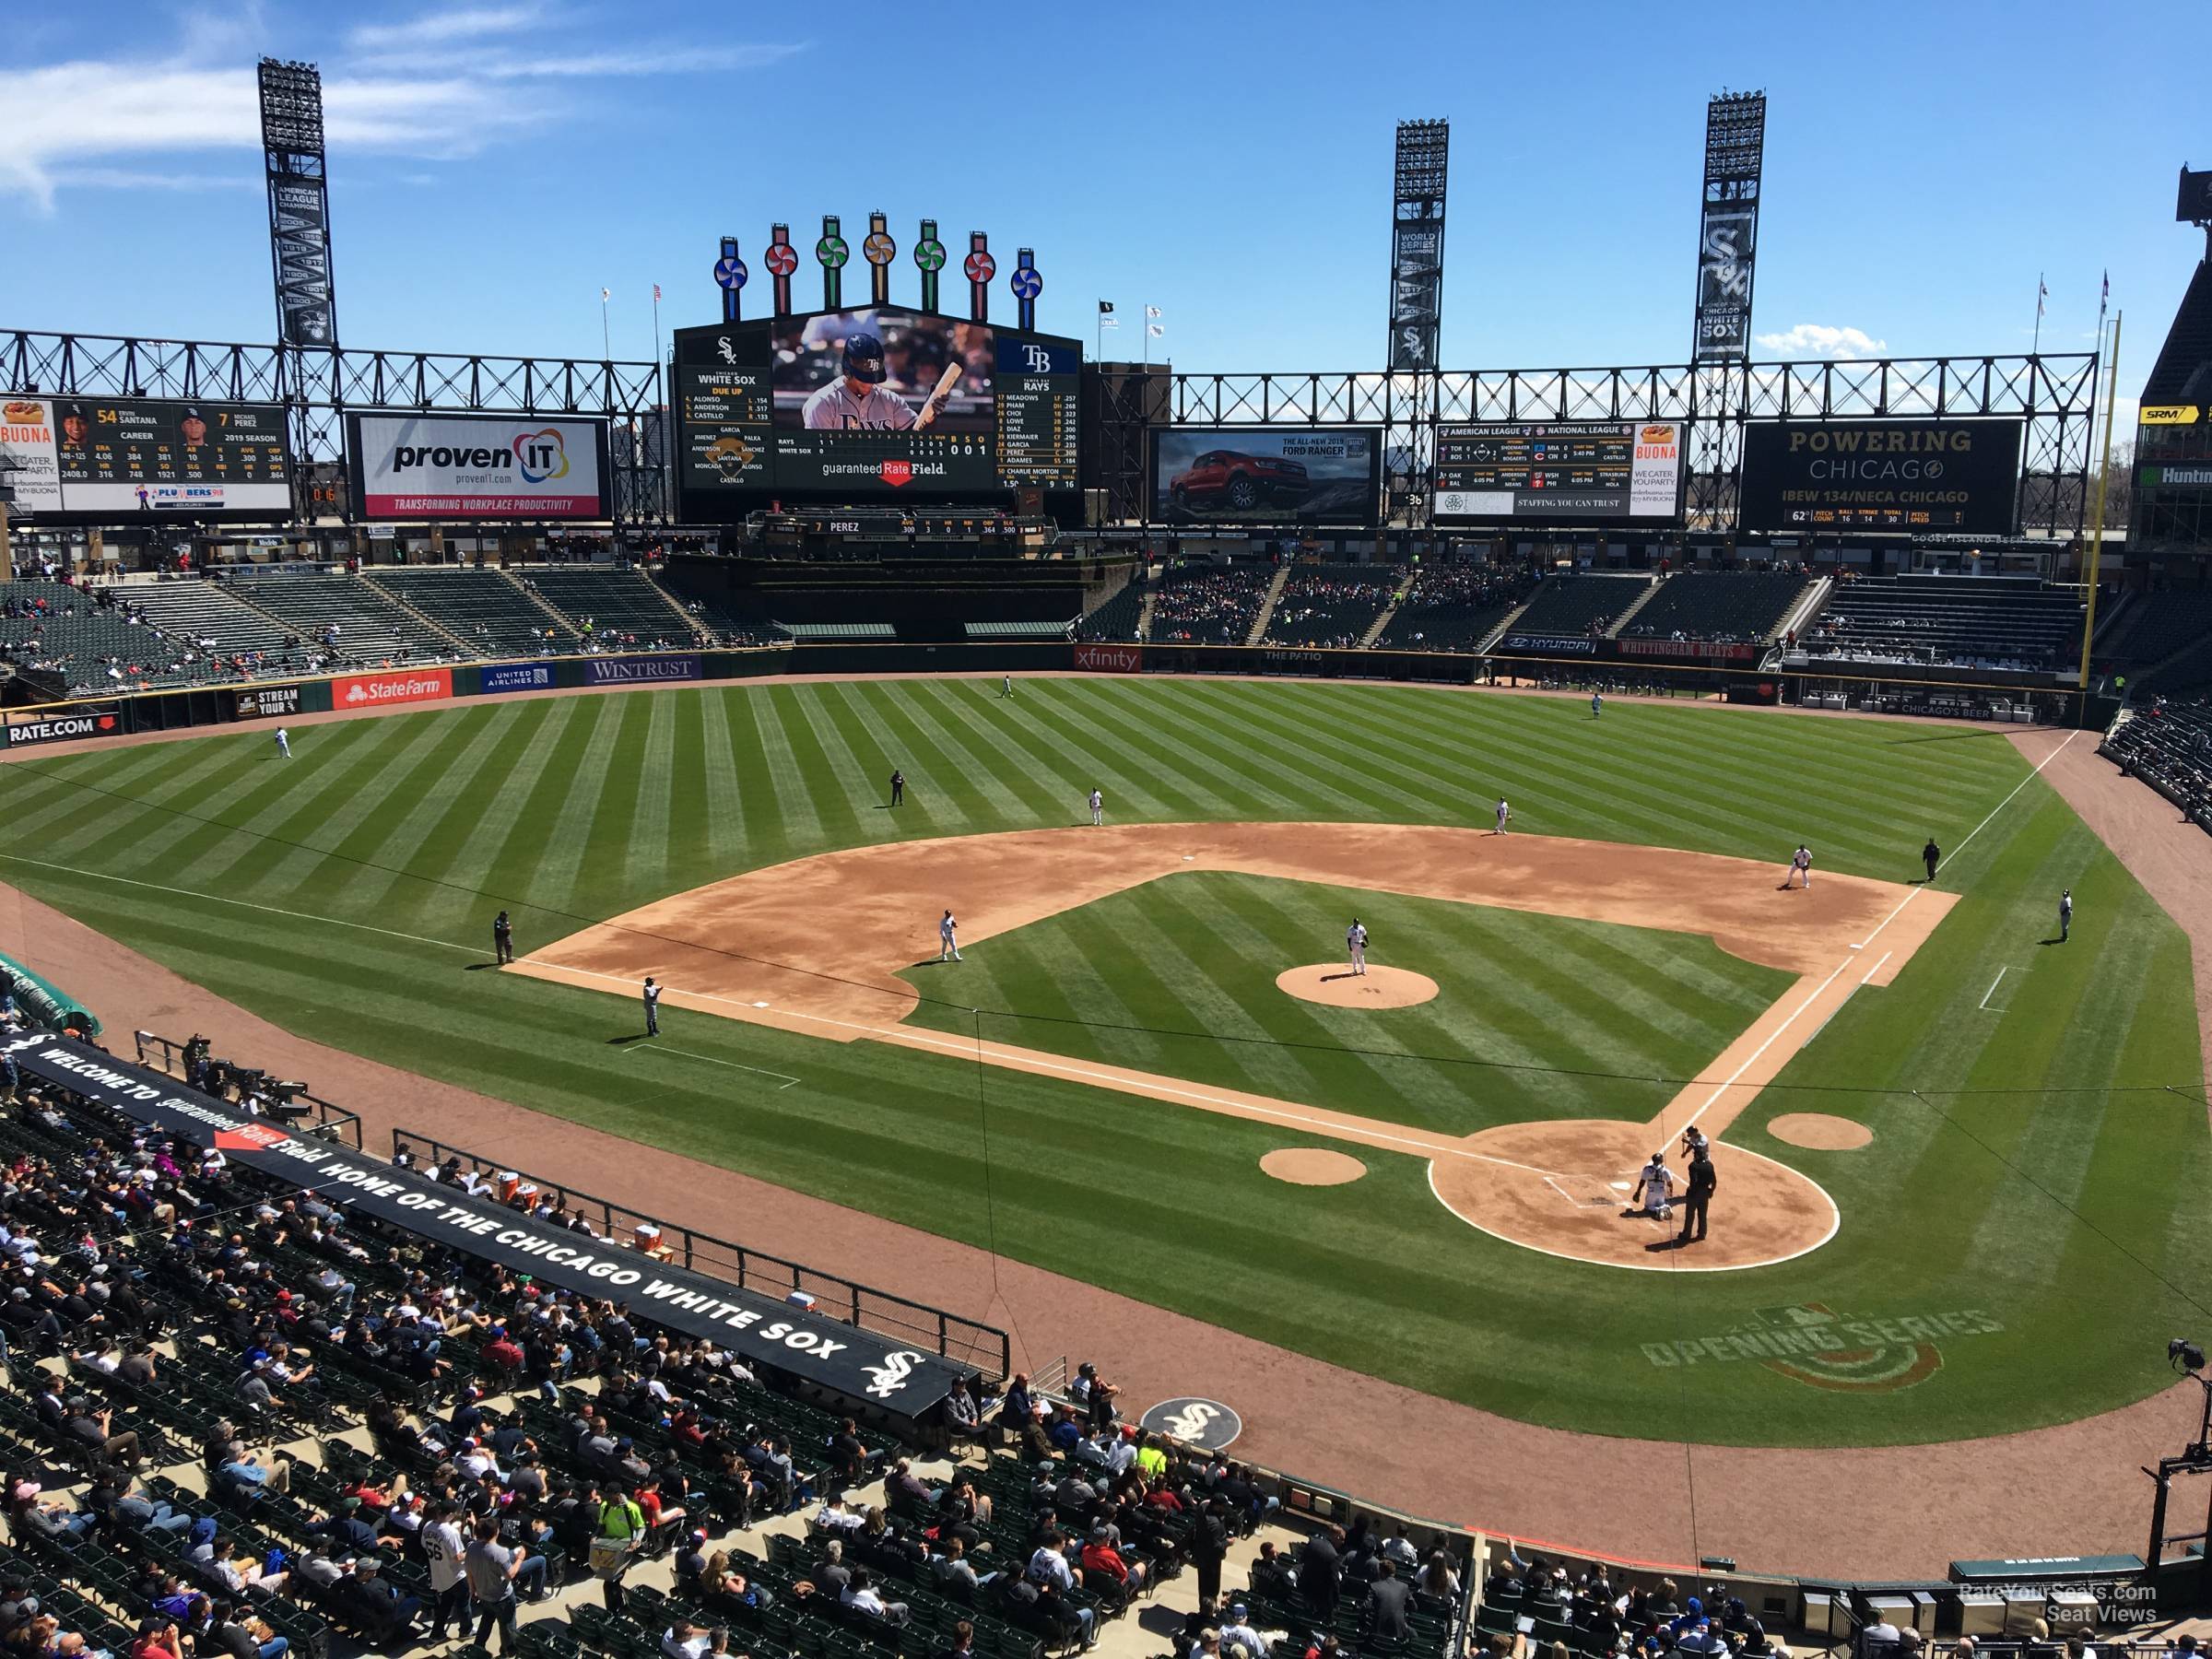 section 334, row 1 seat view  - guaranteed rate field